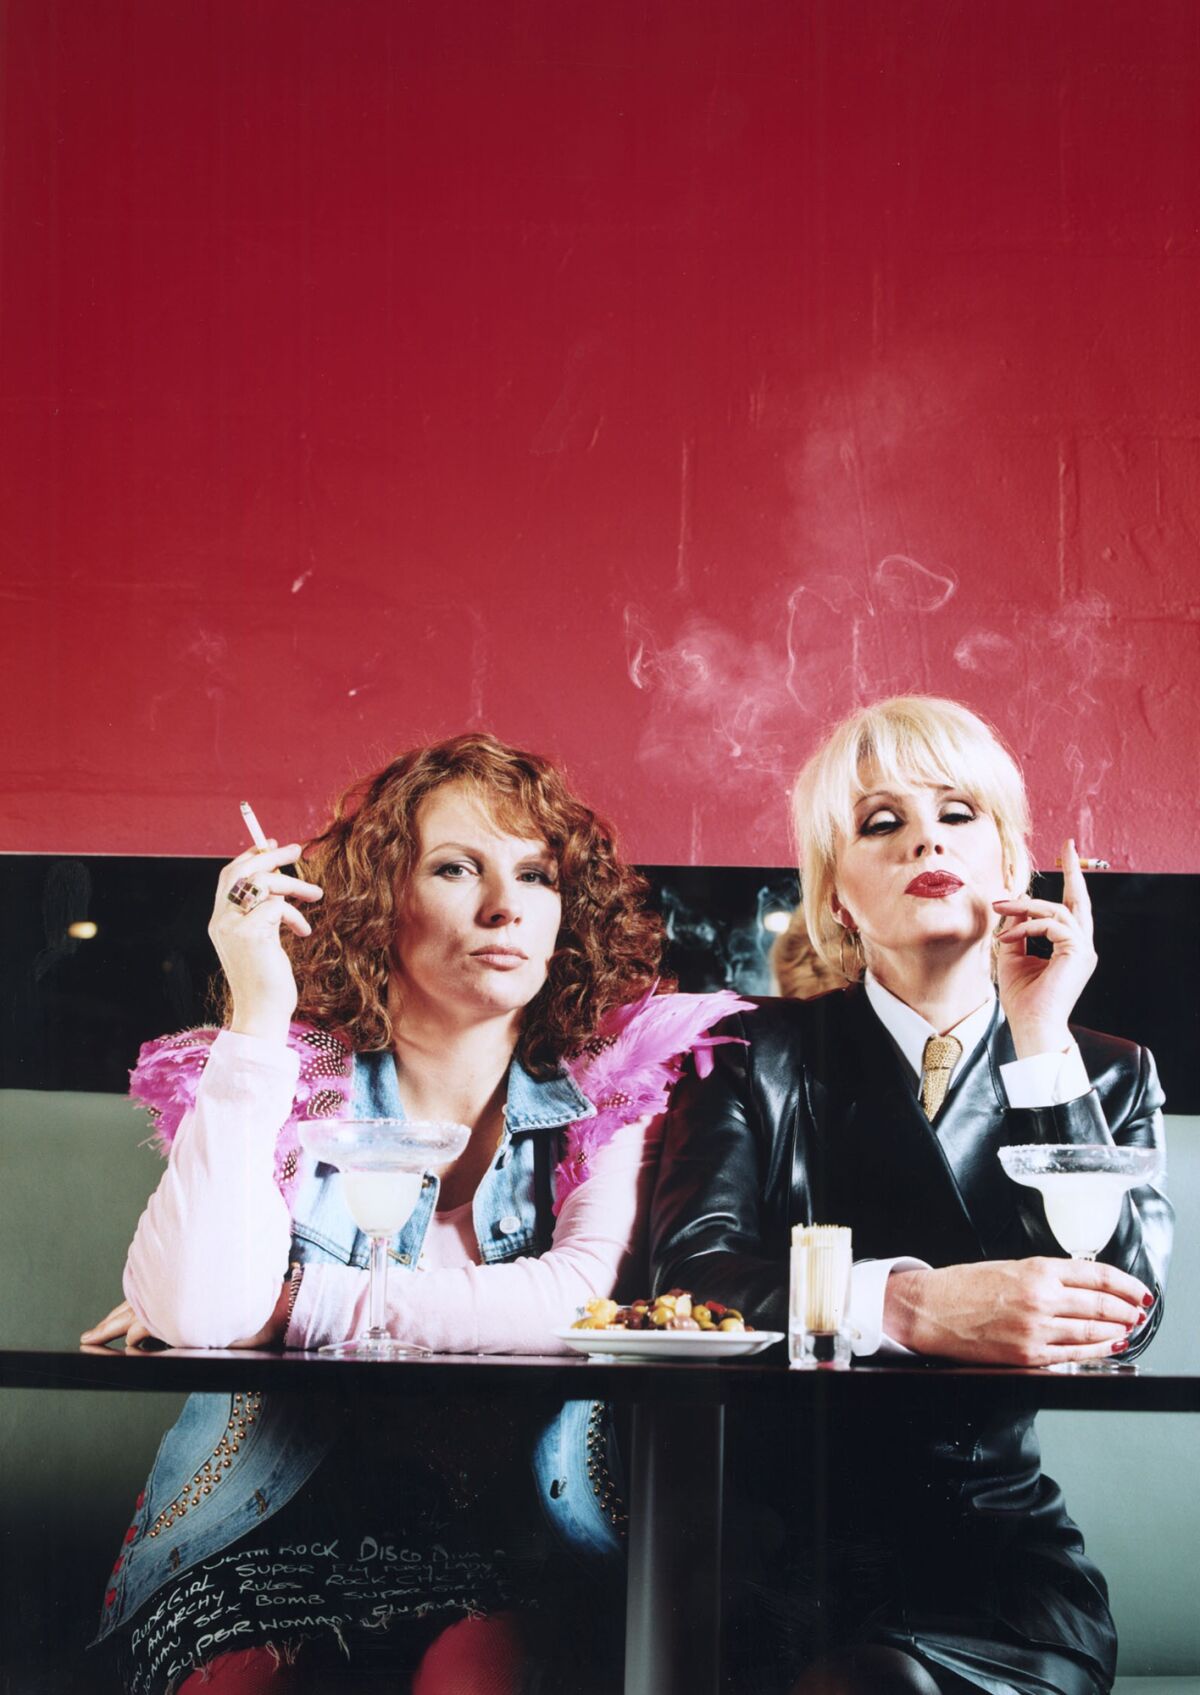  Jennifer Saunders, left, and Joanna Lumley in “Absolutely Fabulous” on Comedy Central.